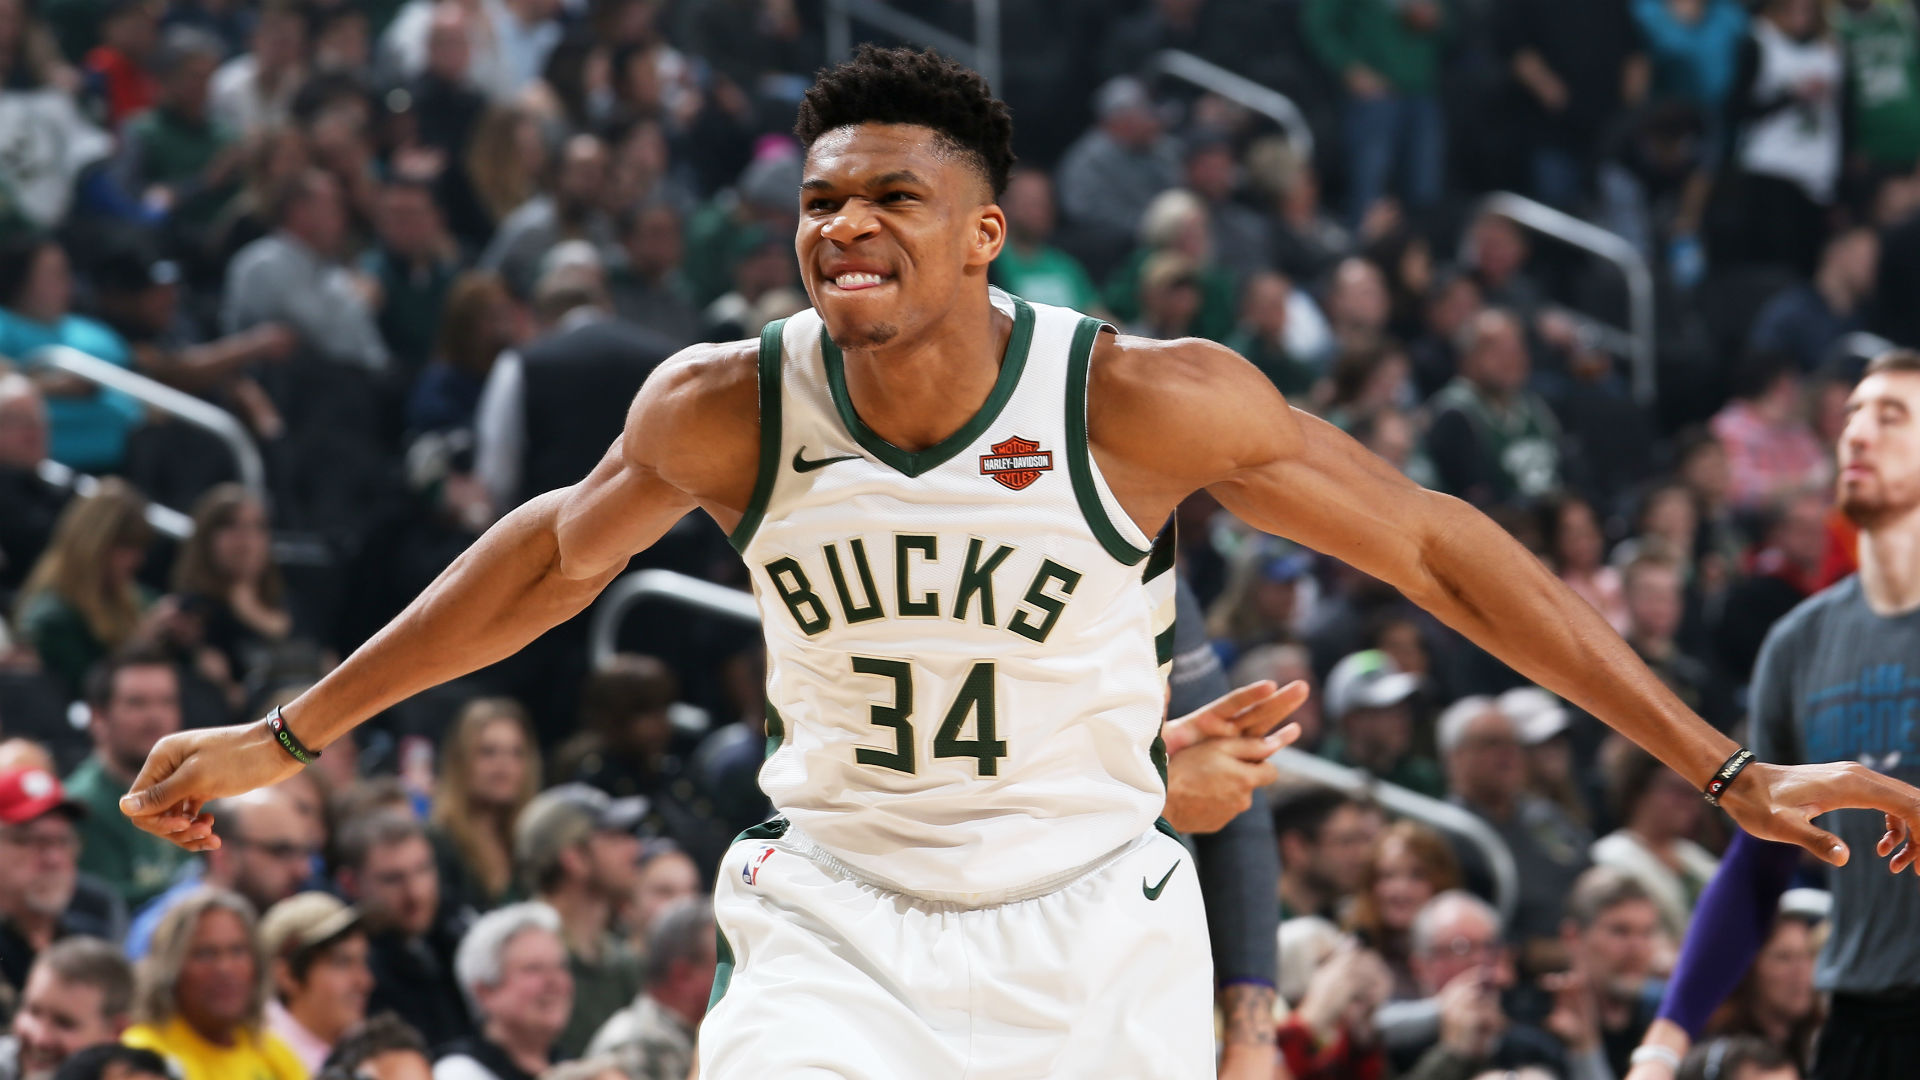 NBA scores and highlights: Giannis Antetokounmpo dominates in win over Charlotte ...1920 x 1080